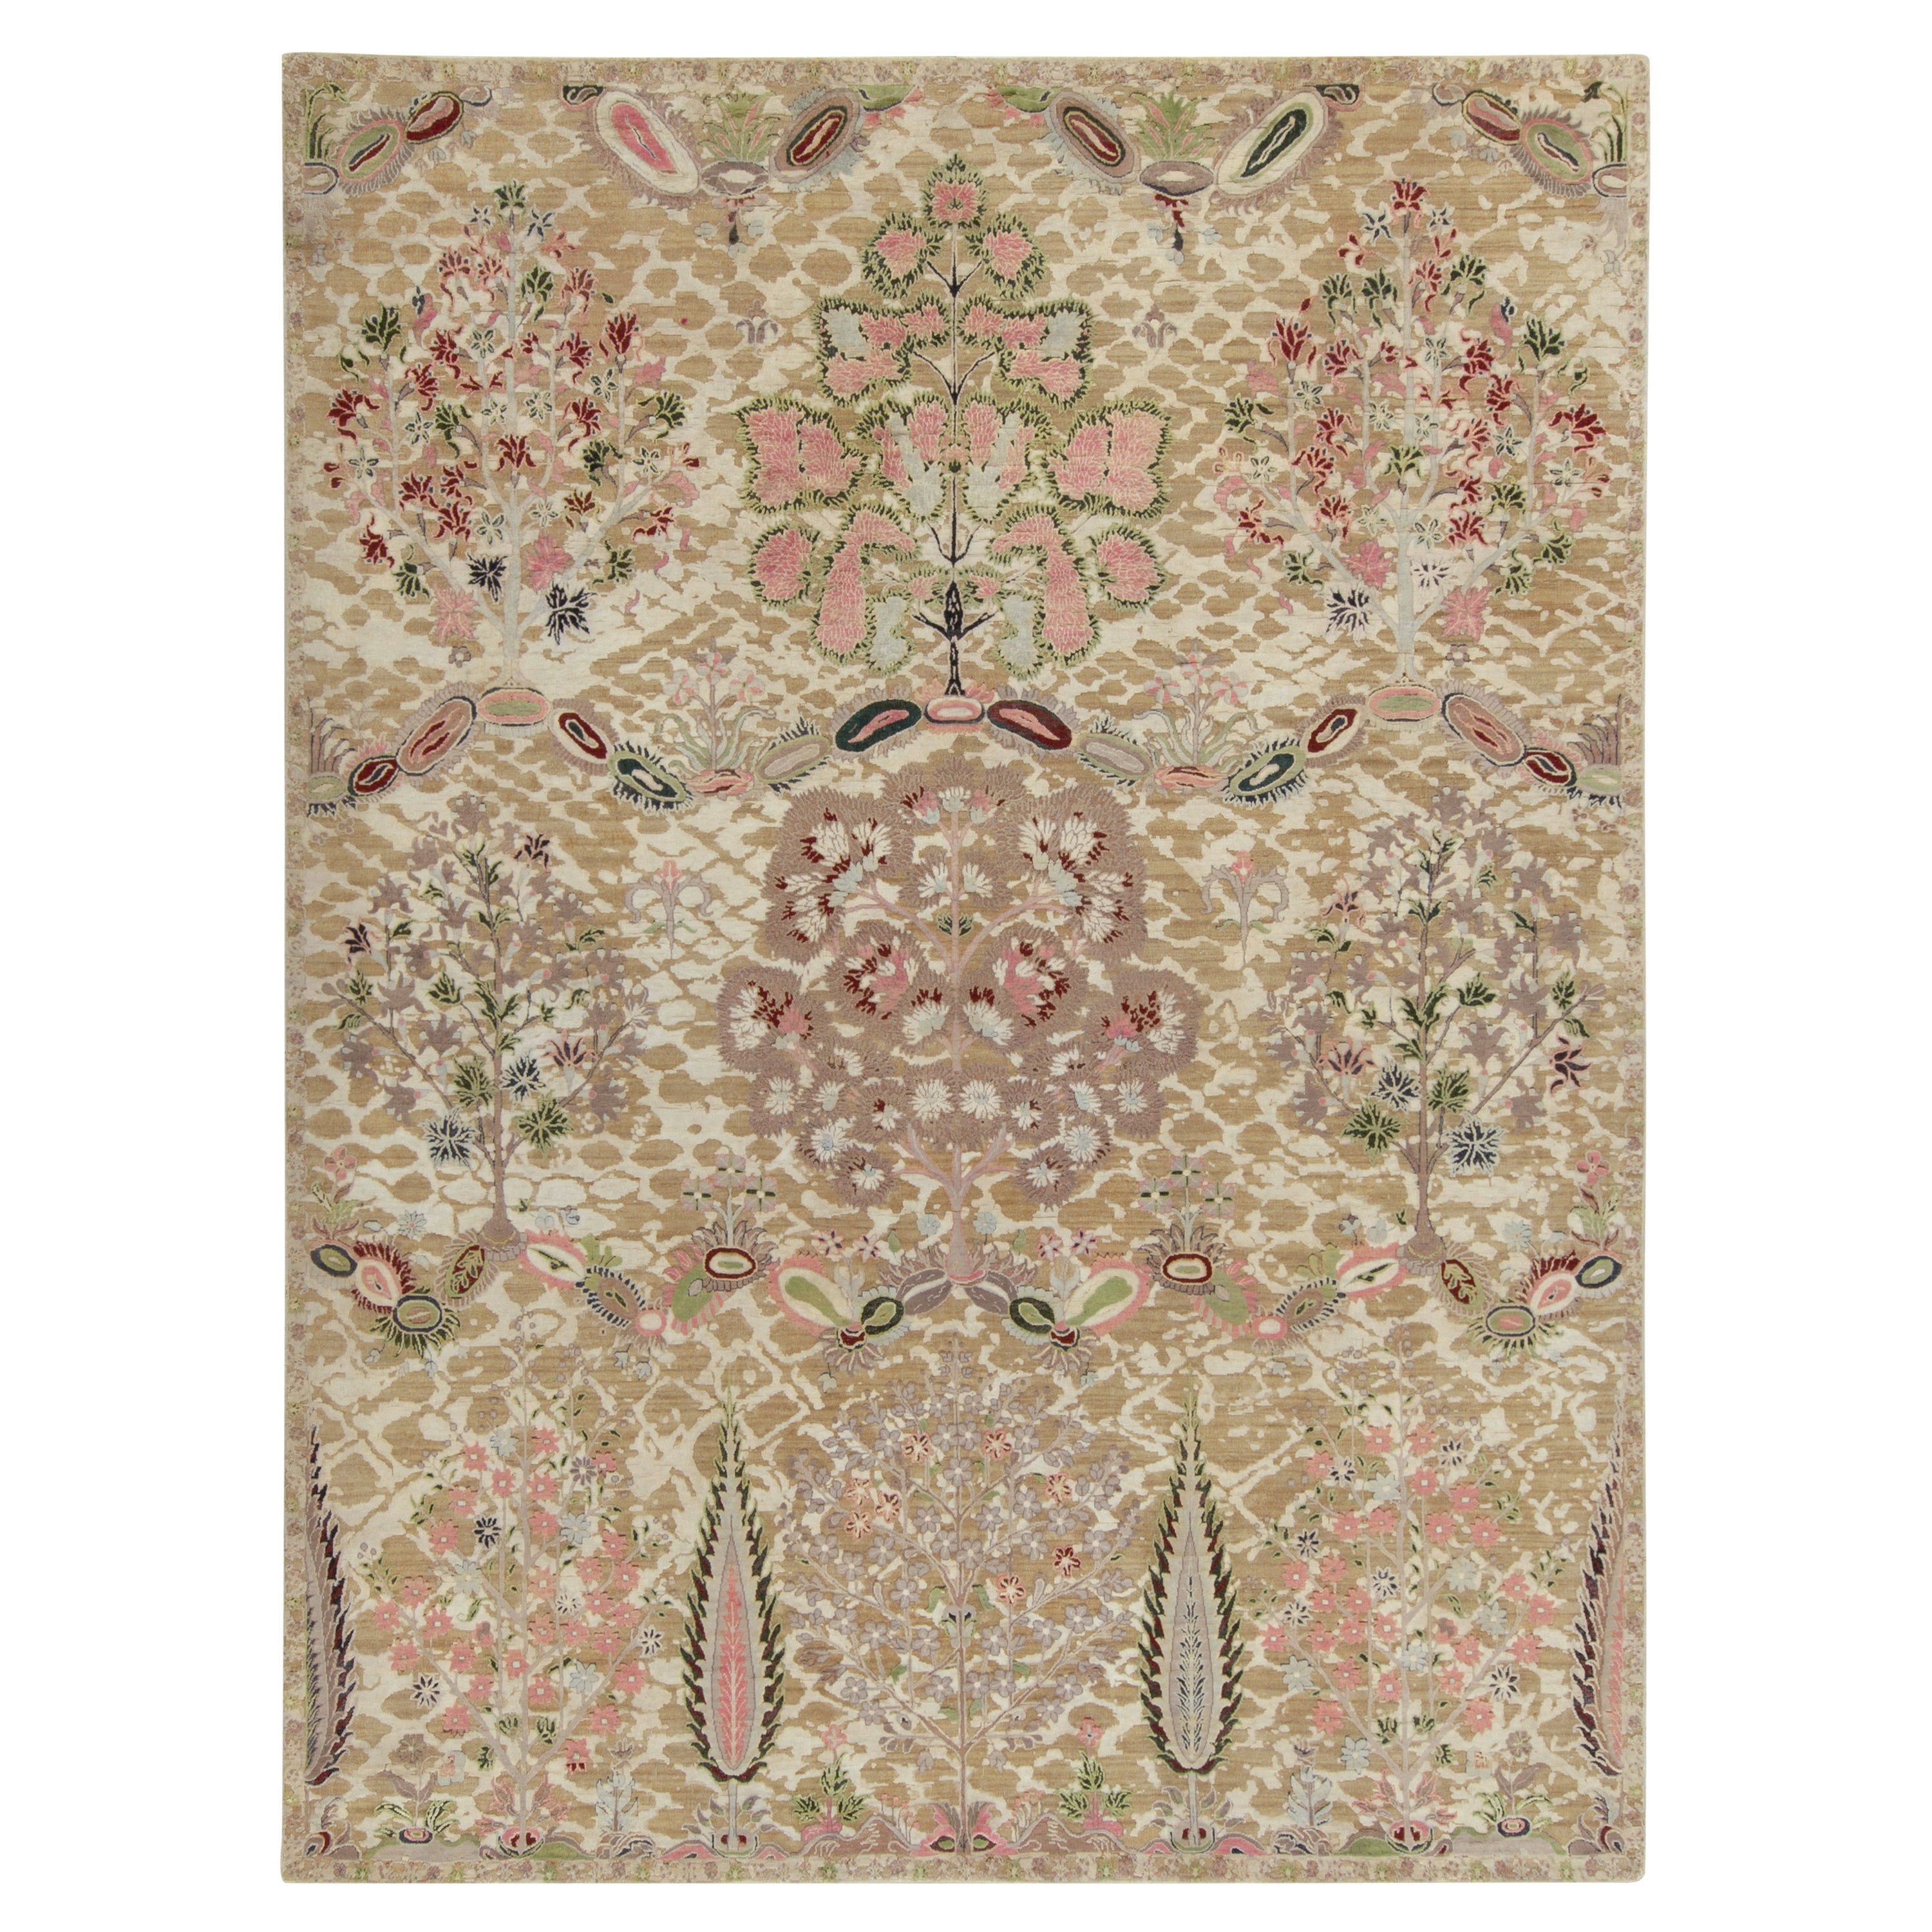 Rug and Kilim’s Classic Style Rug in Green, Pink and Beige-Brown Floral ...